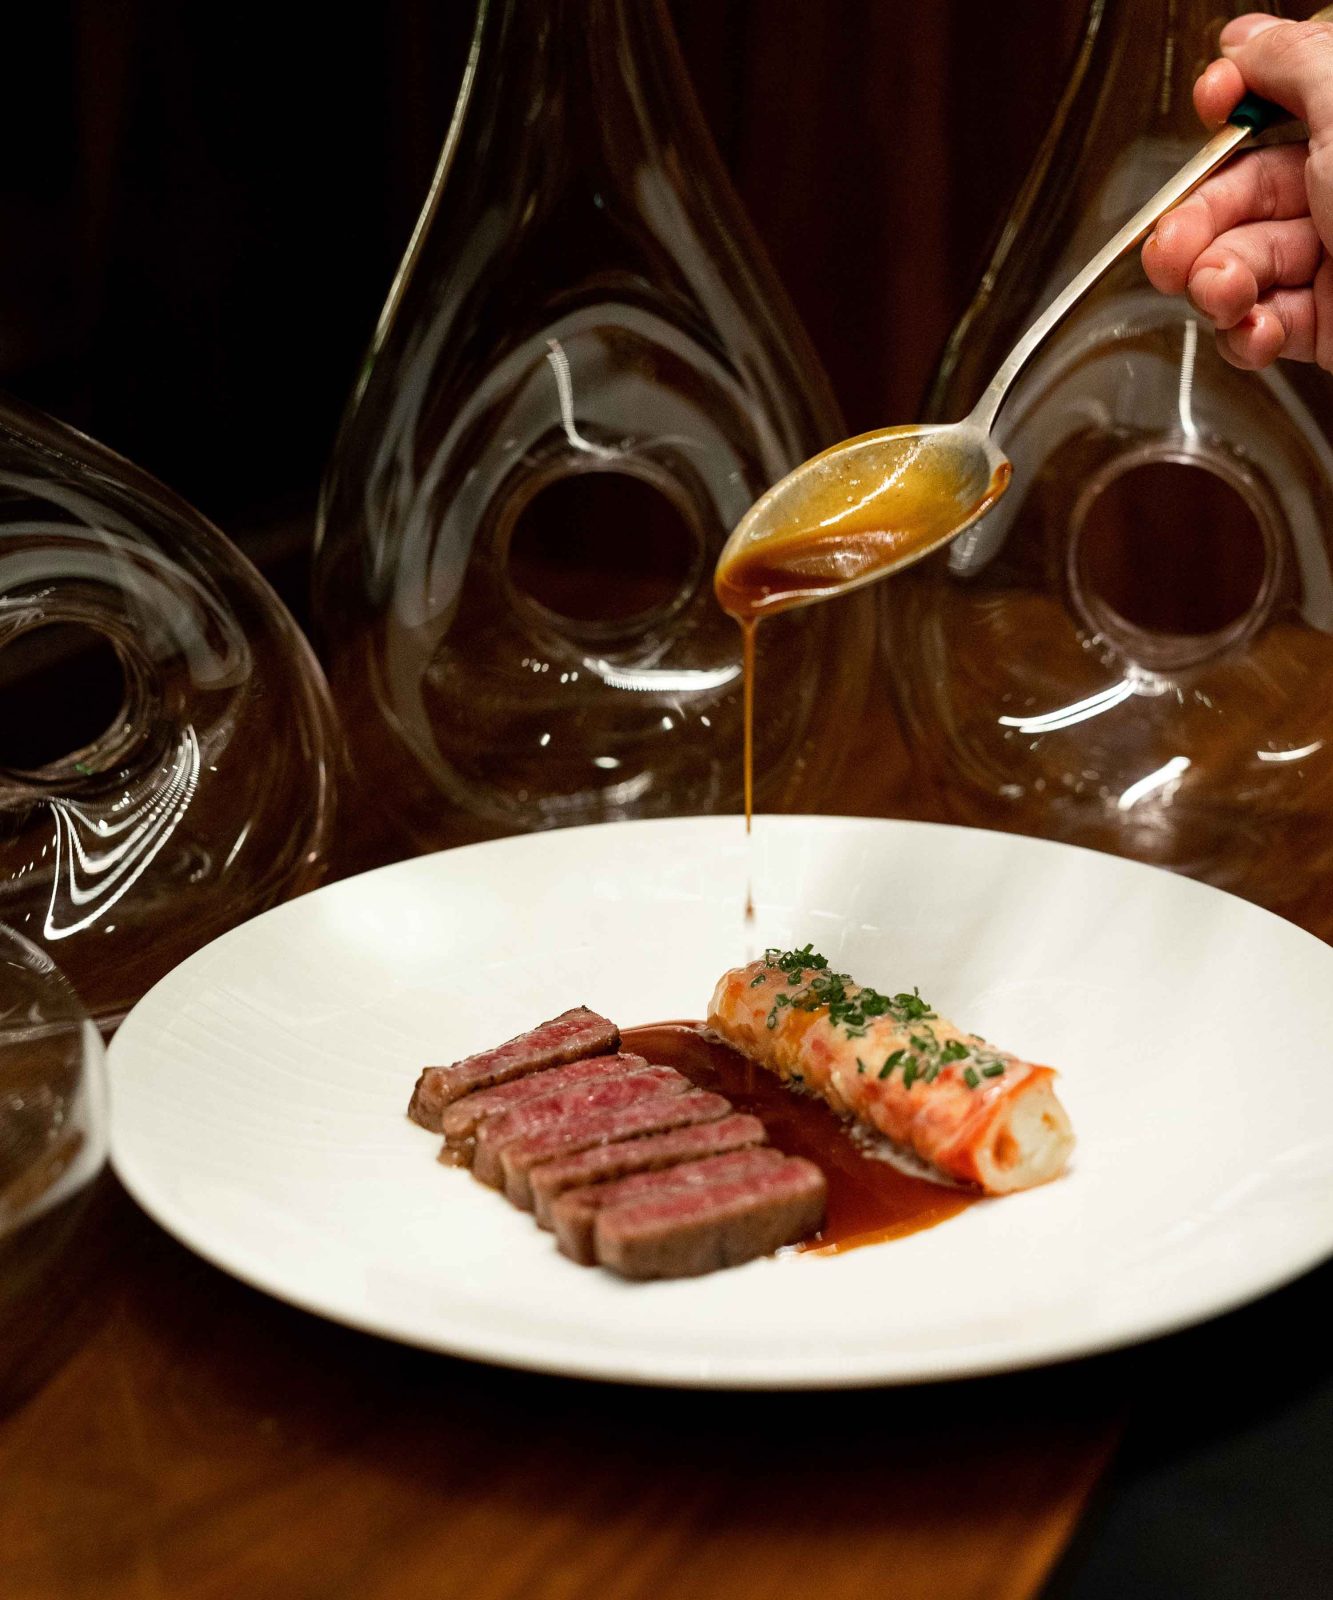 Inside The Macallan’s One-Of-A-Kind Immersive Dinner & Tasting At The PGA National Resort